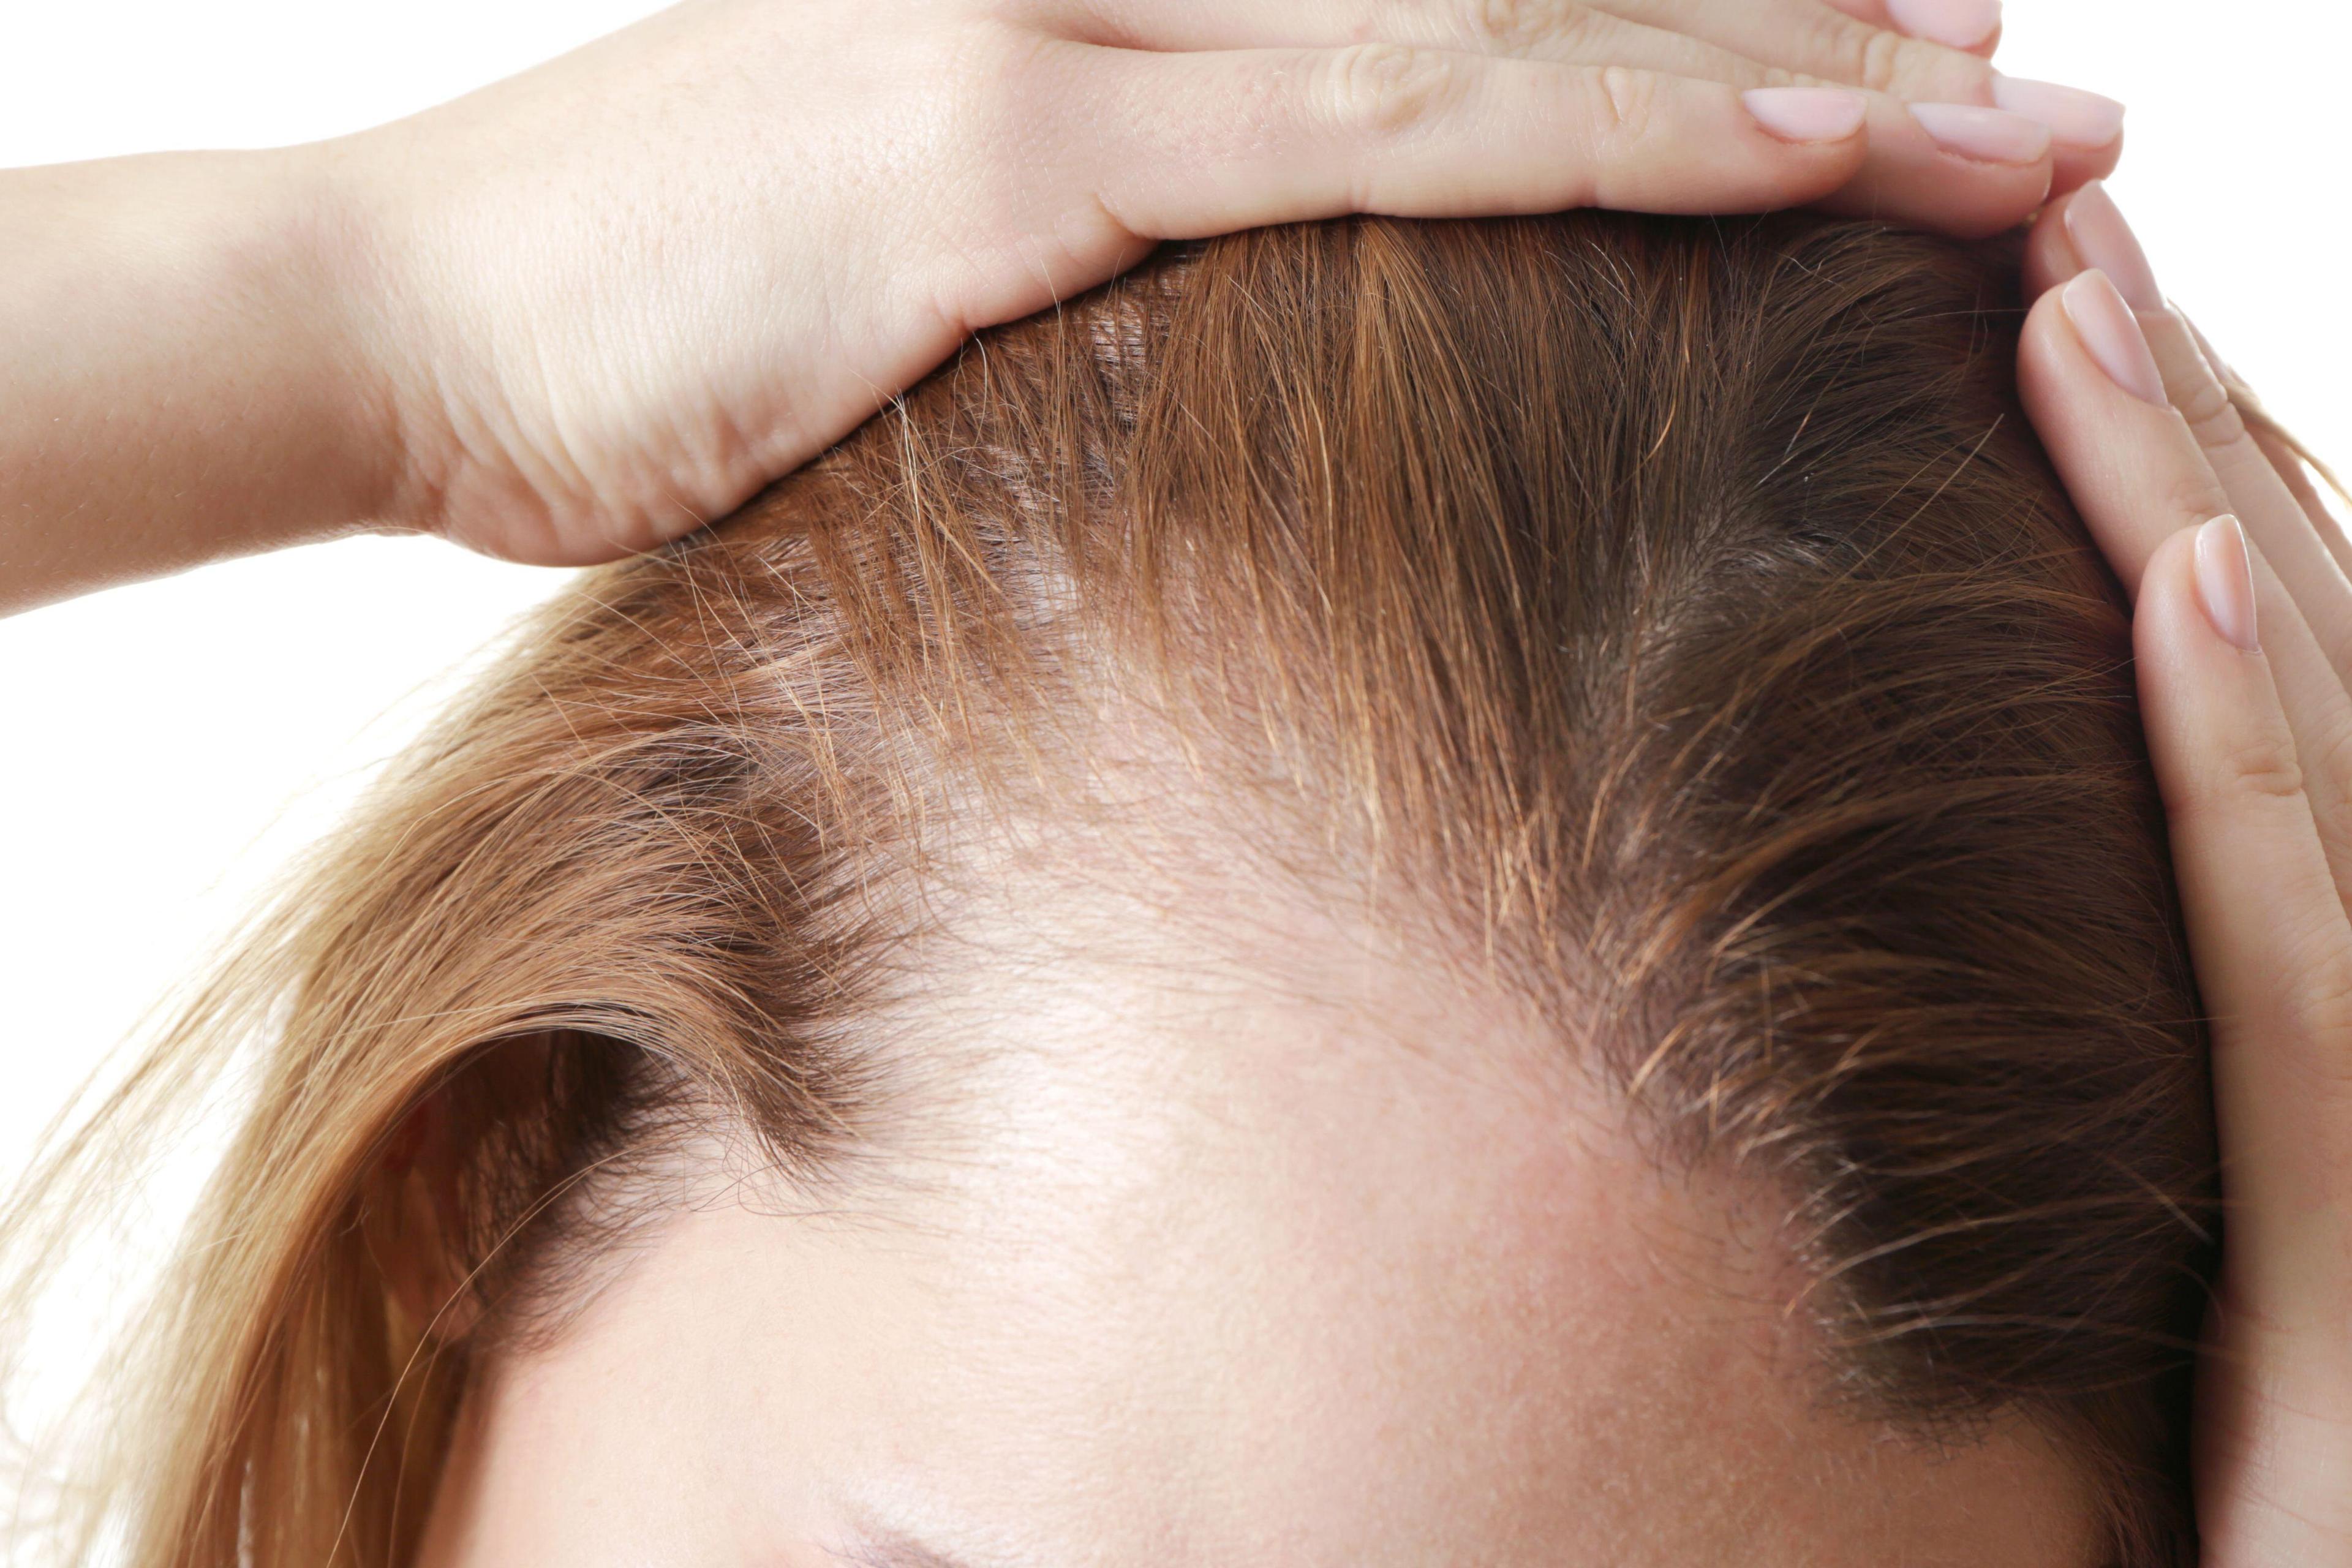 What are the most common types of hair loss and their treatment options?